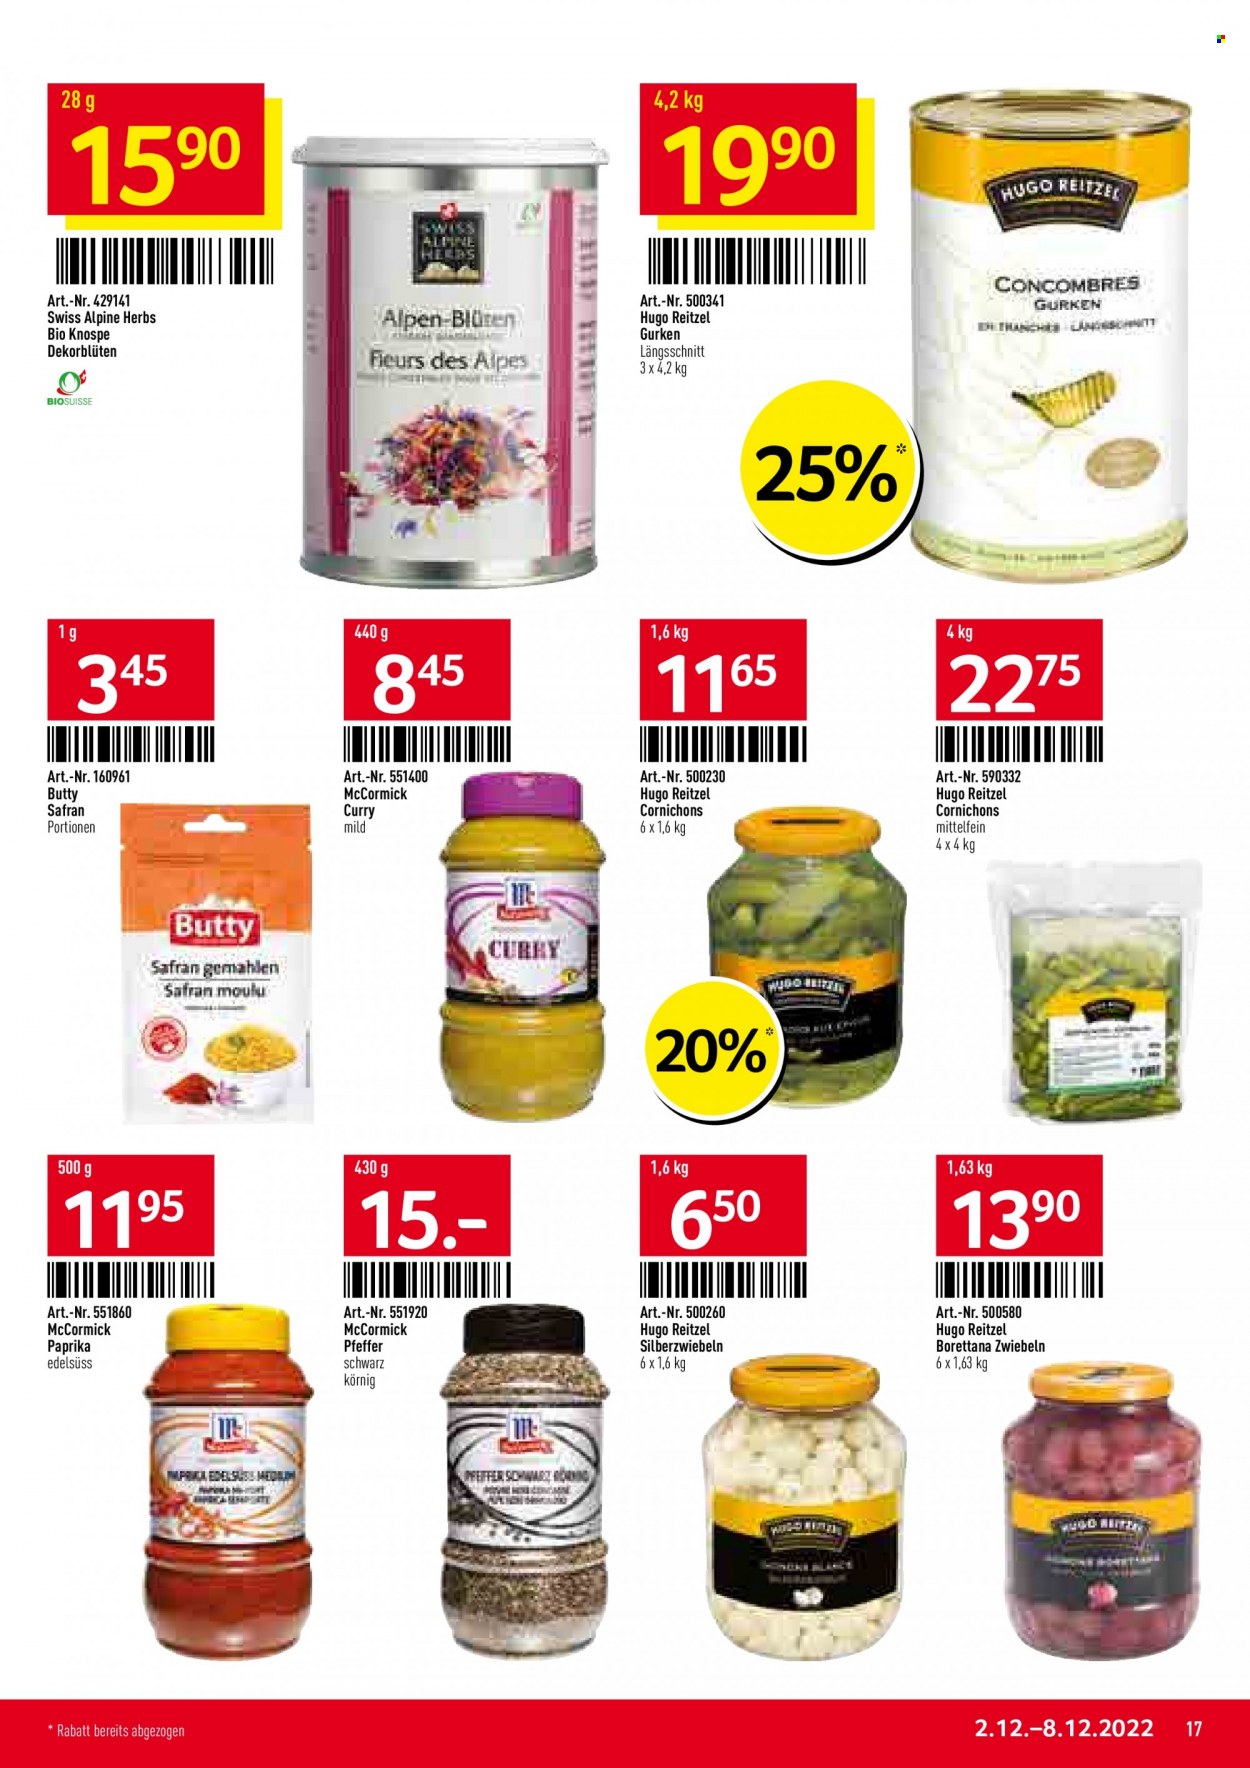 Catalogue TransGourmet - 2.12.2022 - 8.12.2022. Page 17.